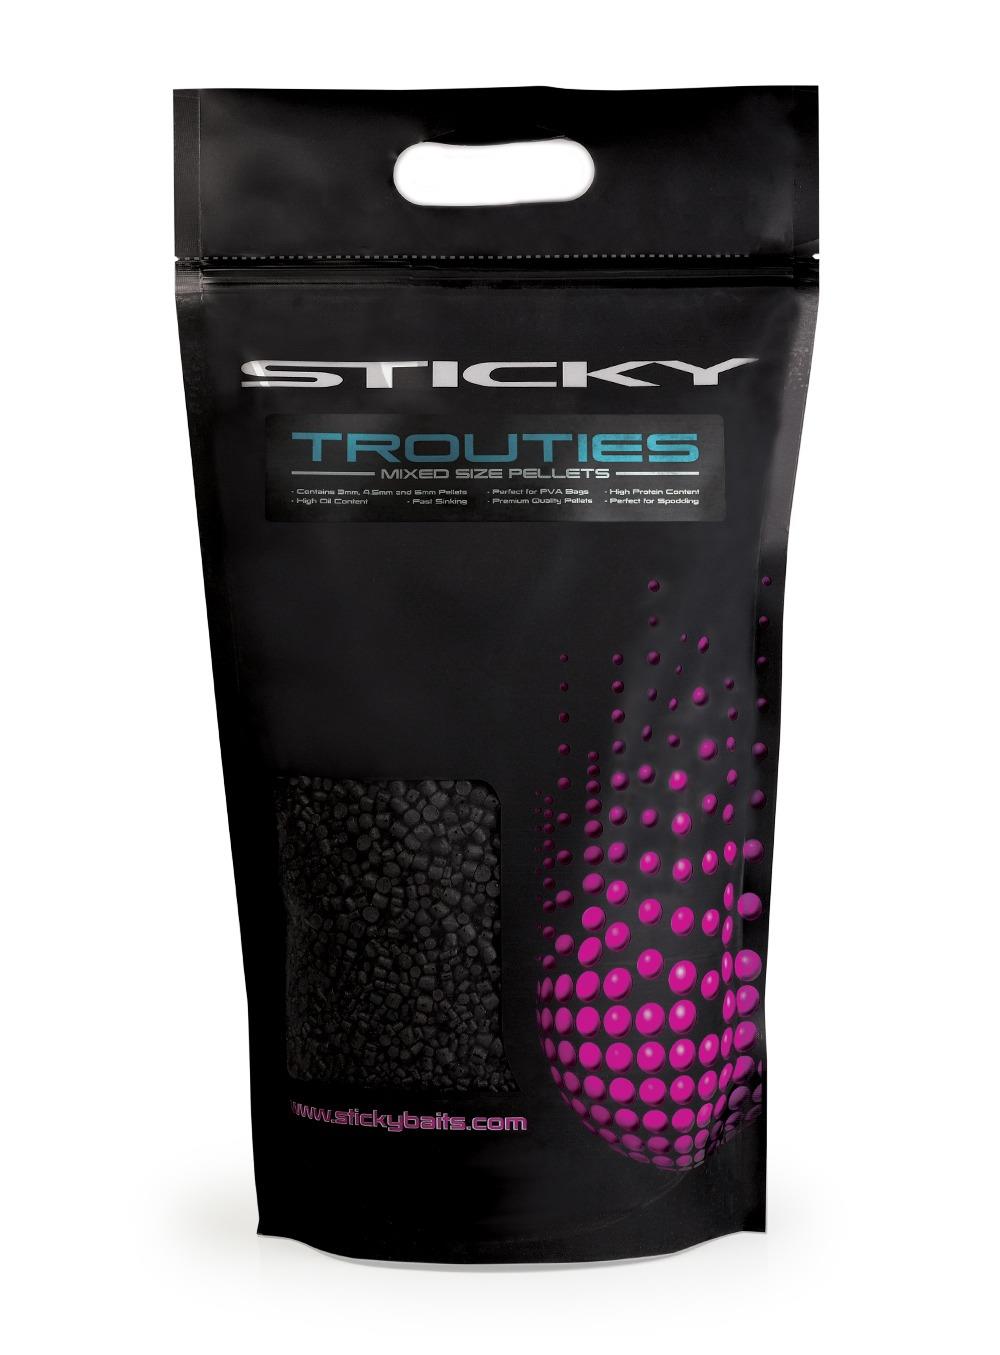 Sticky Baits Trouties Mixed Size Pellets 2.5kg